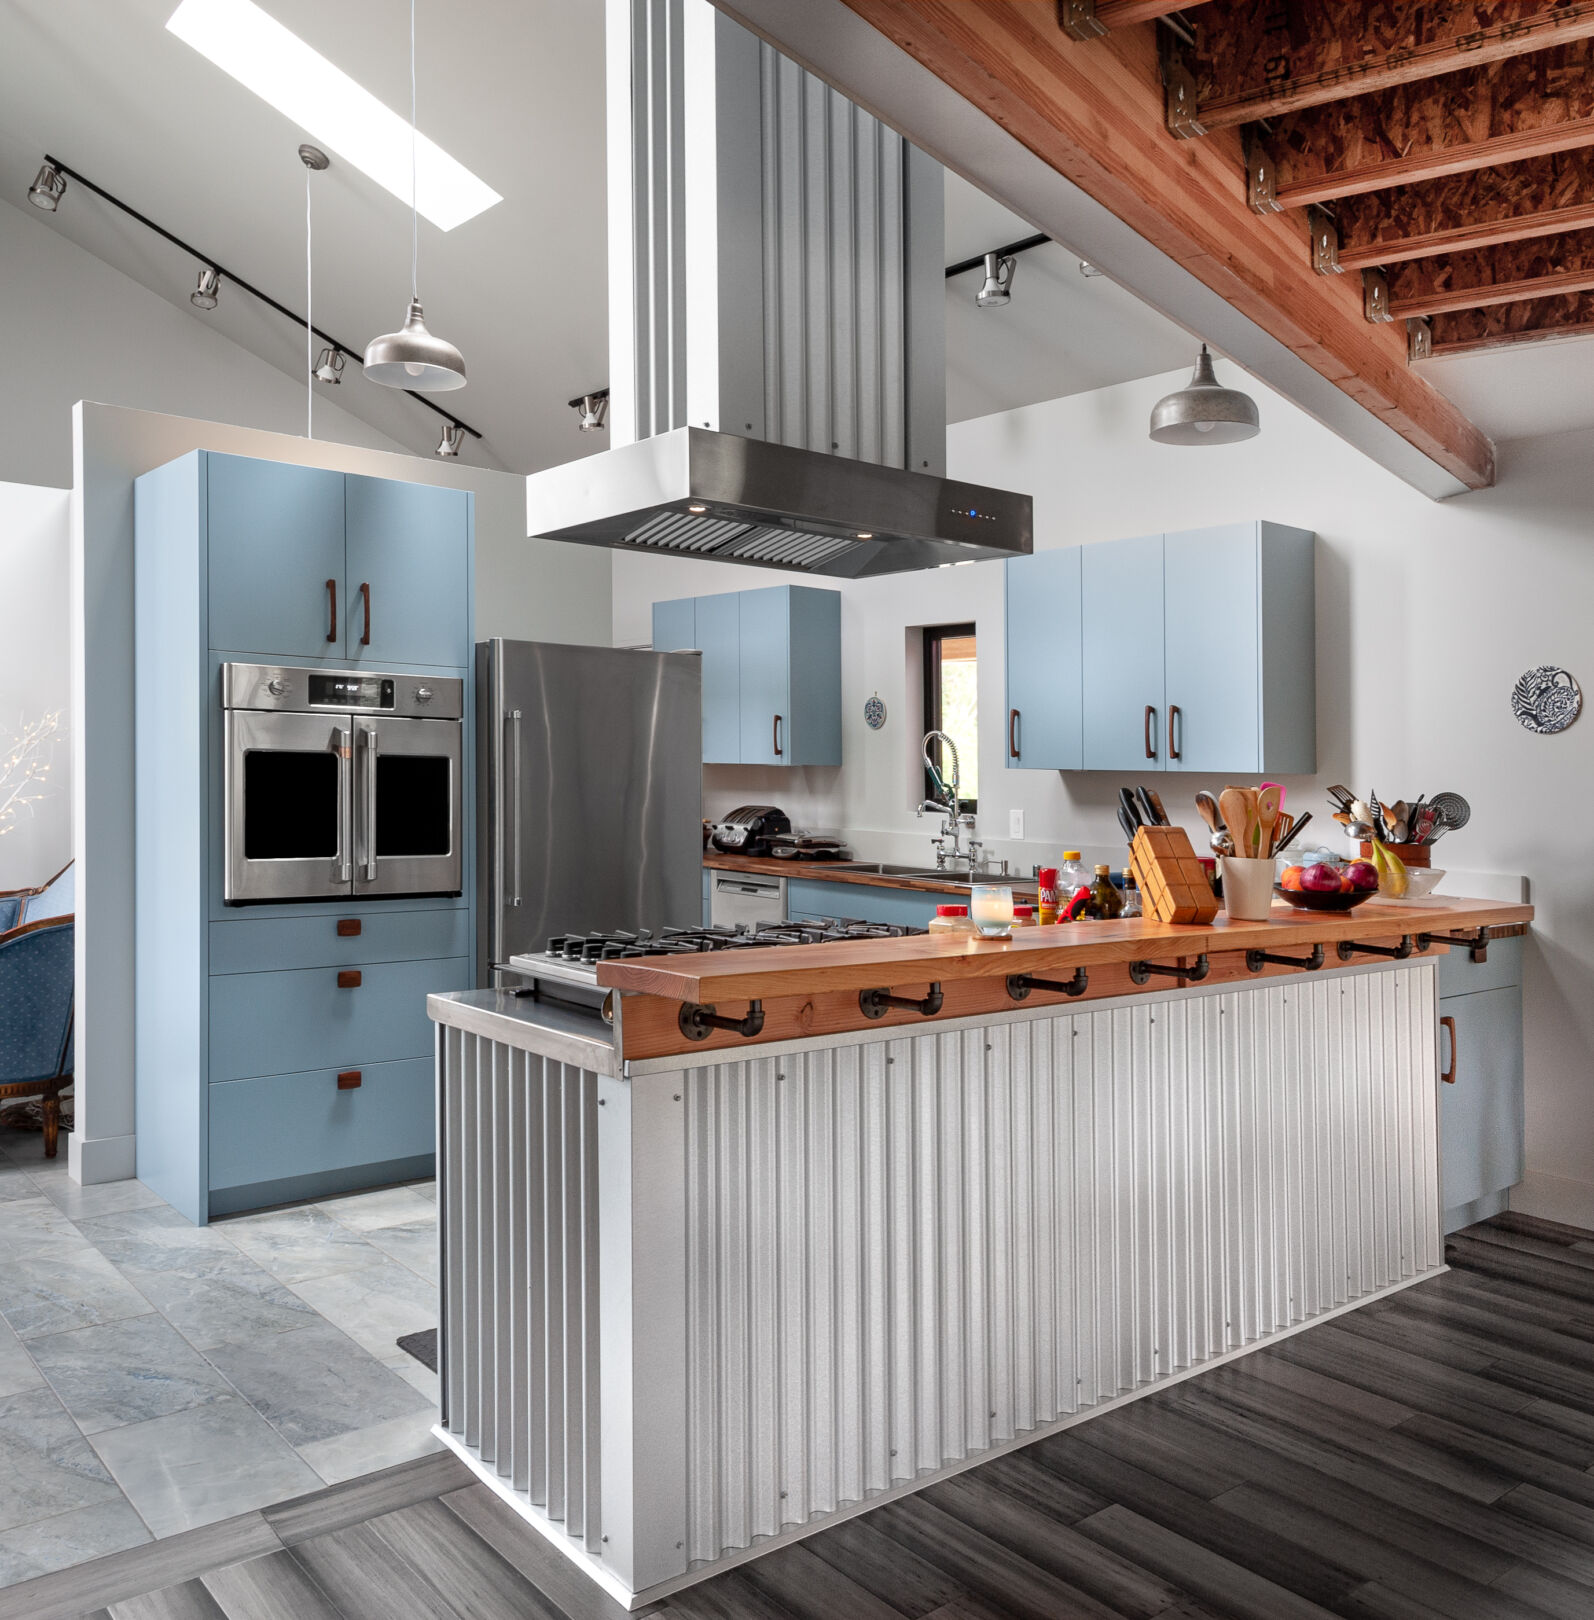 Modern, blue-grey painted custom kitchen cabinetry